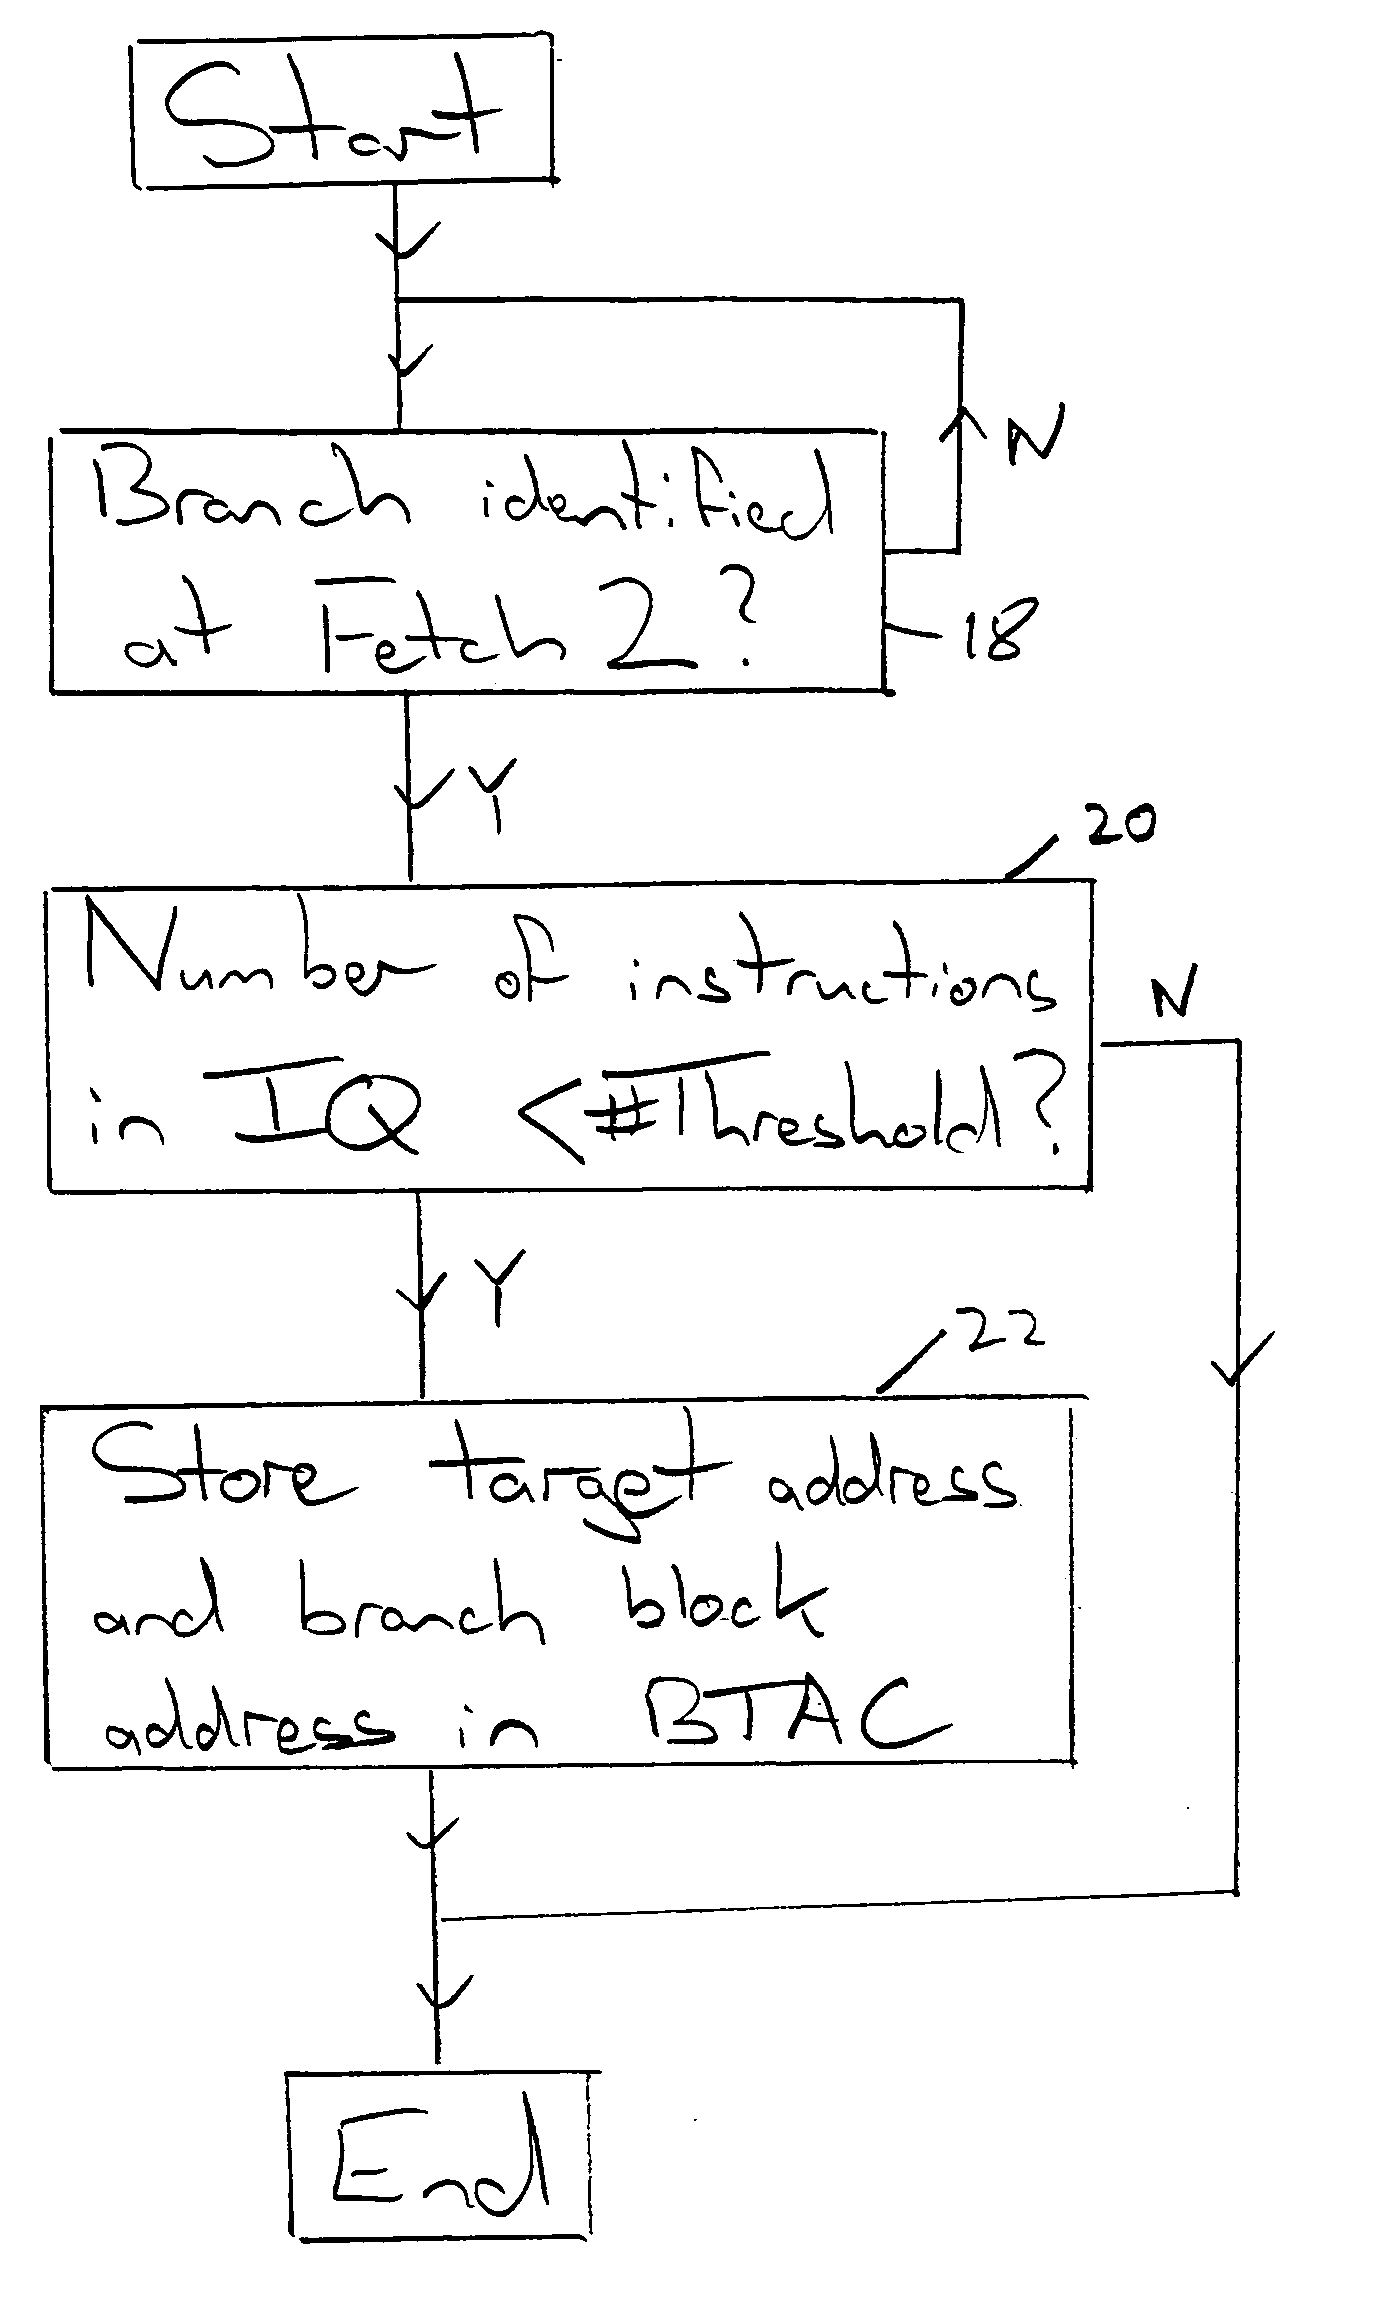 Control of a branch target cache within a data processing system